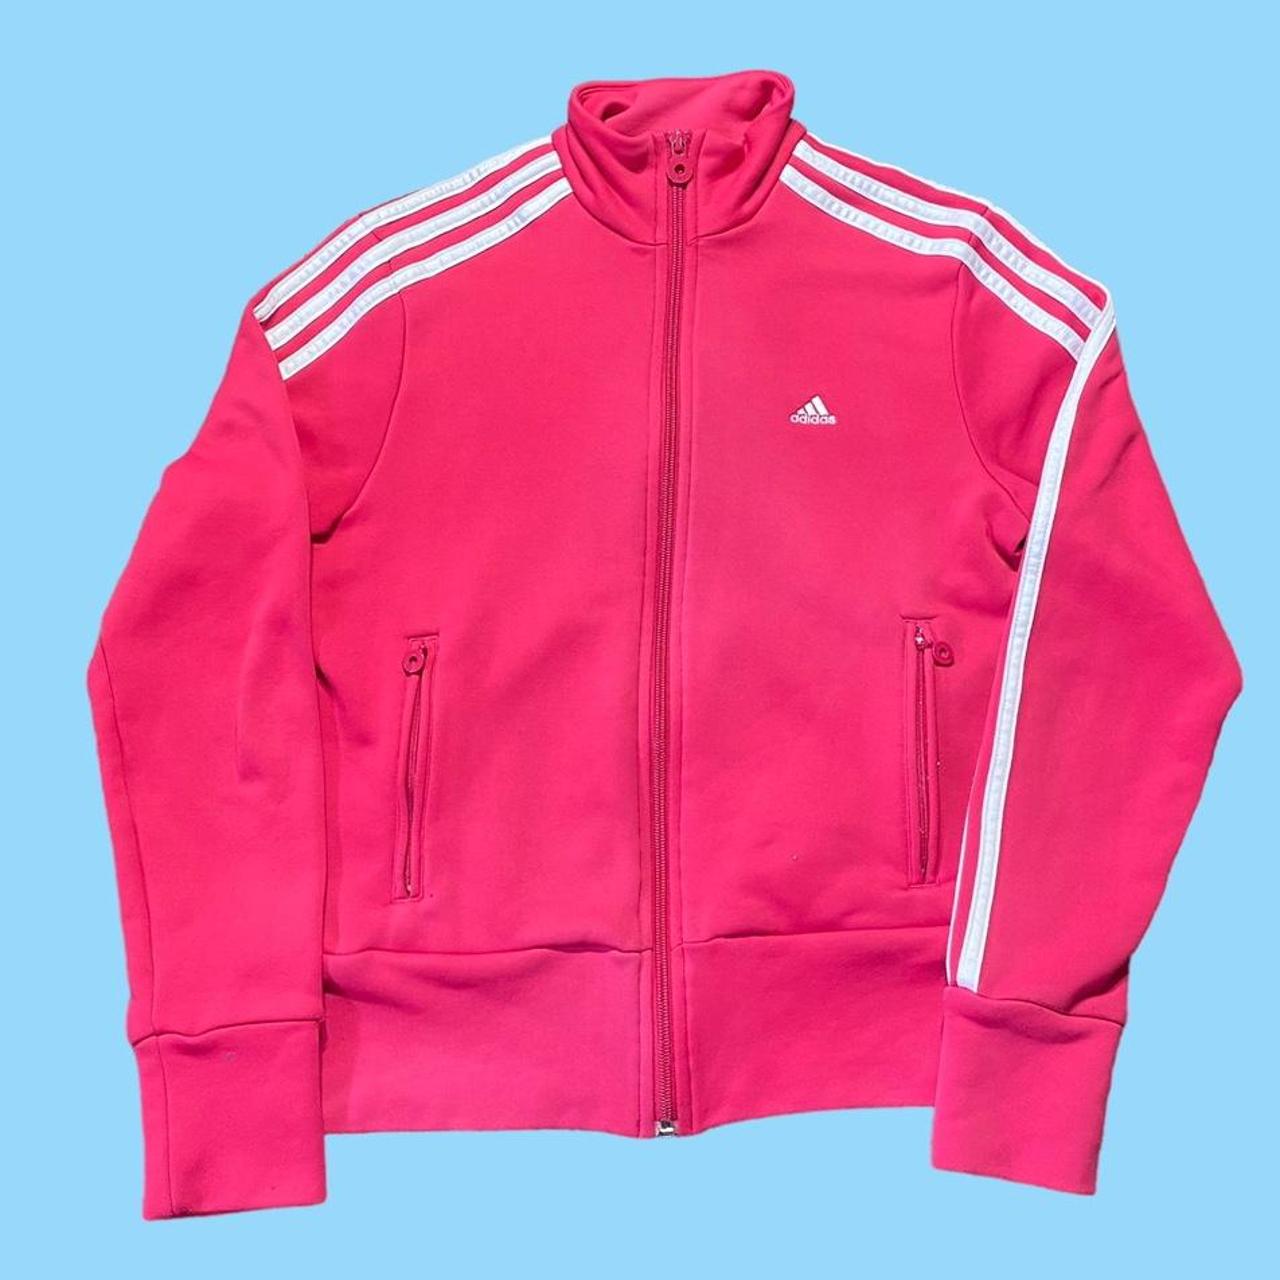 Adidas track top Pink Preloved condition Size... - Depop